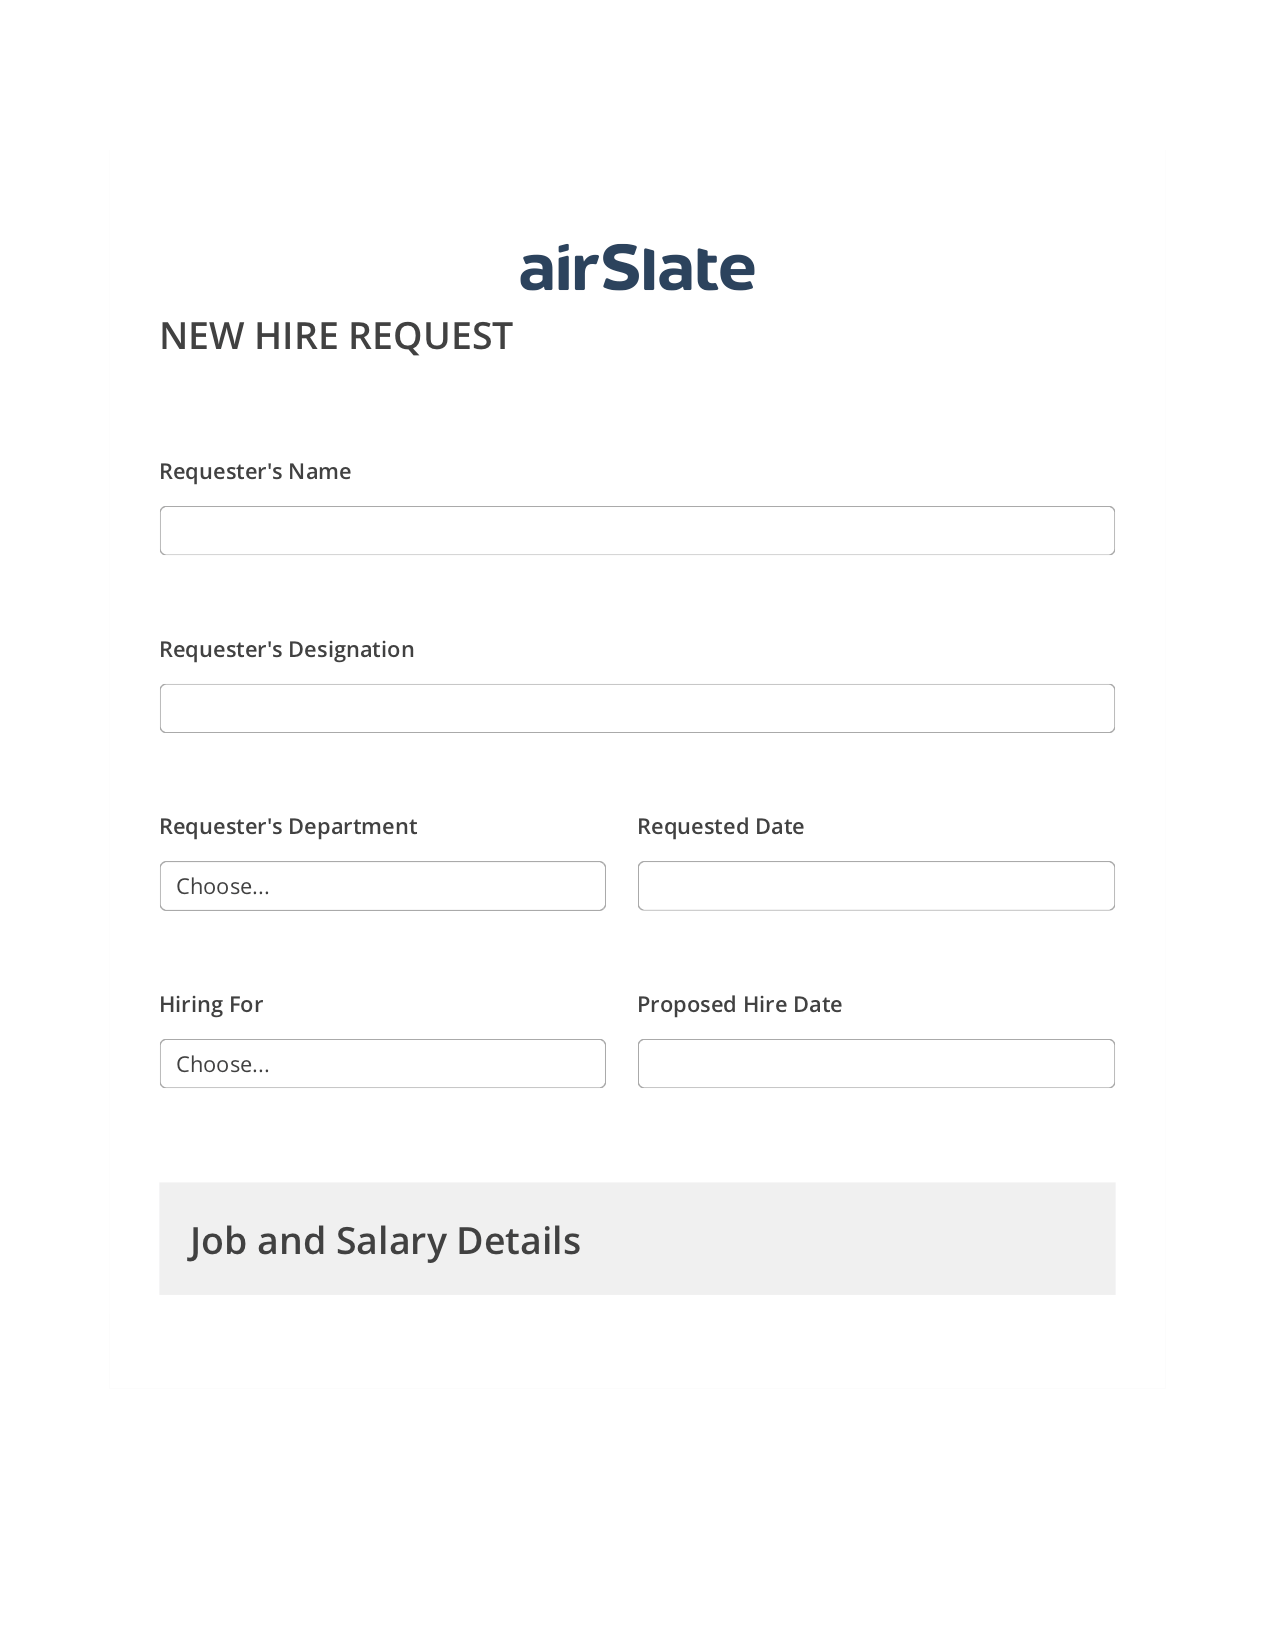 Hiring Request Workflow Pre-fill from CSV File Bot, Reminder Bot, Export to NetSuite Bot